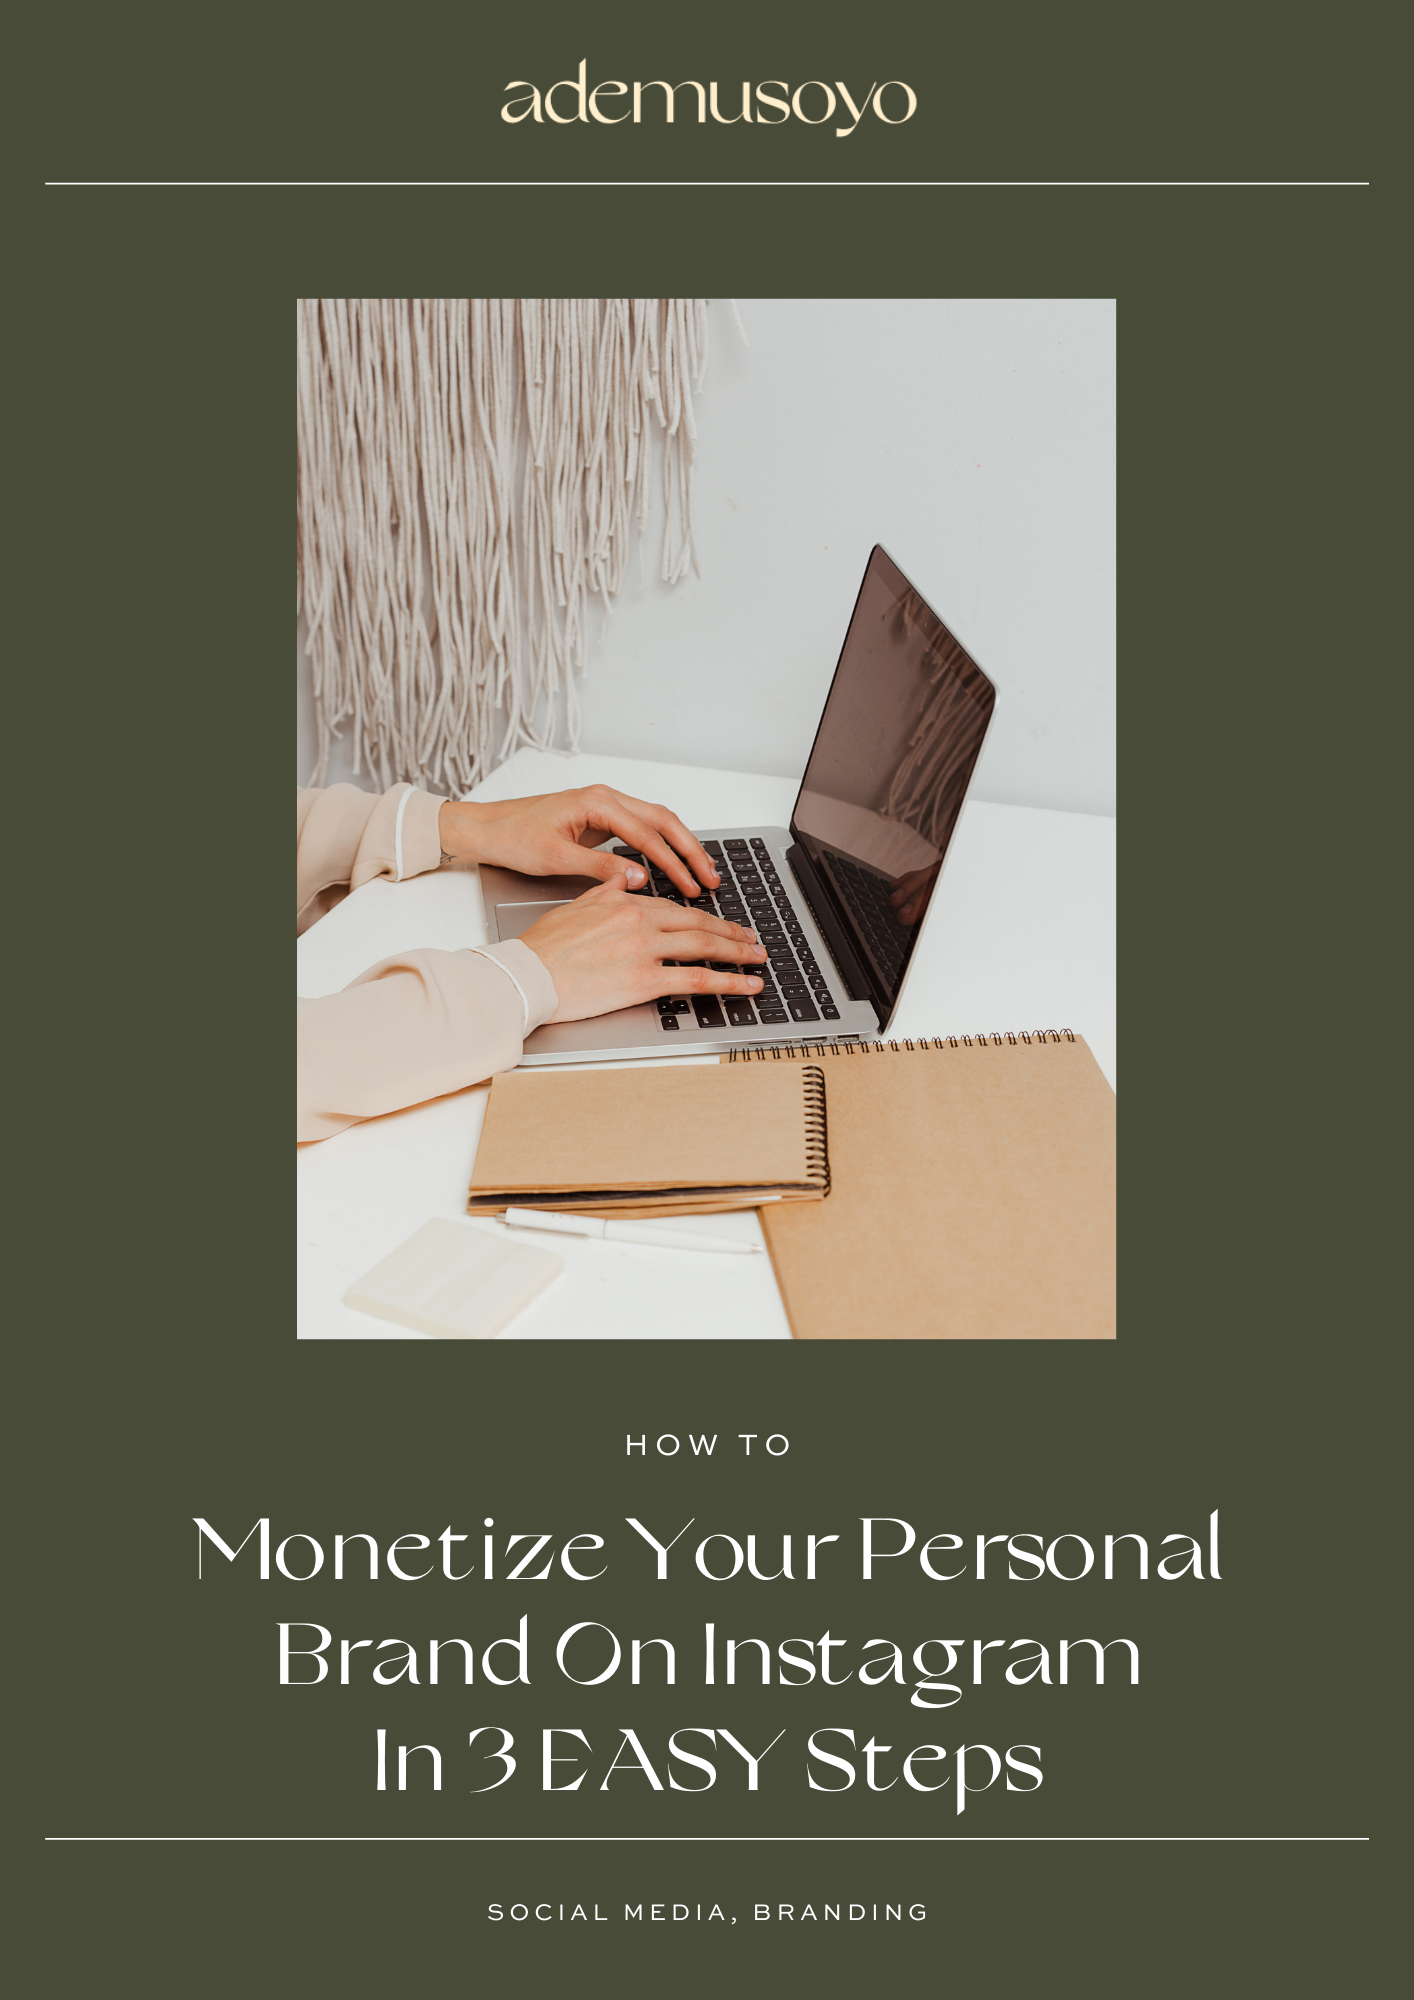 Want to make money doing what you love on Instagram? Learn the simple 3-step process to monetize your personal brand and say goodbye to guesswork. Learn how to leverage Instagram & turn your brands into a profitable business today!